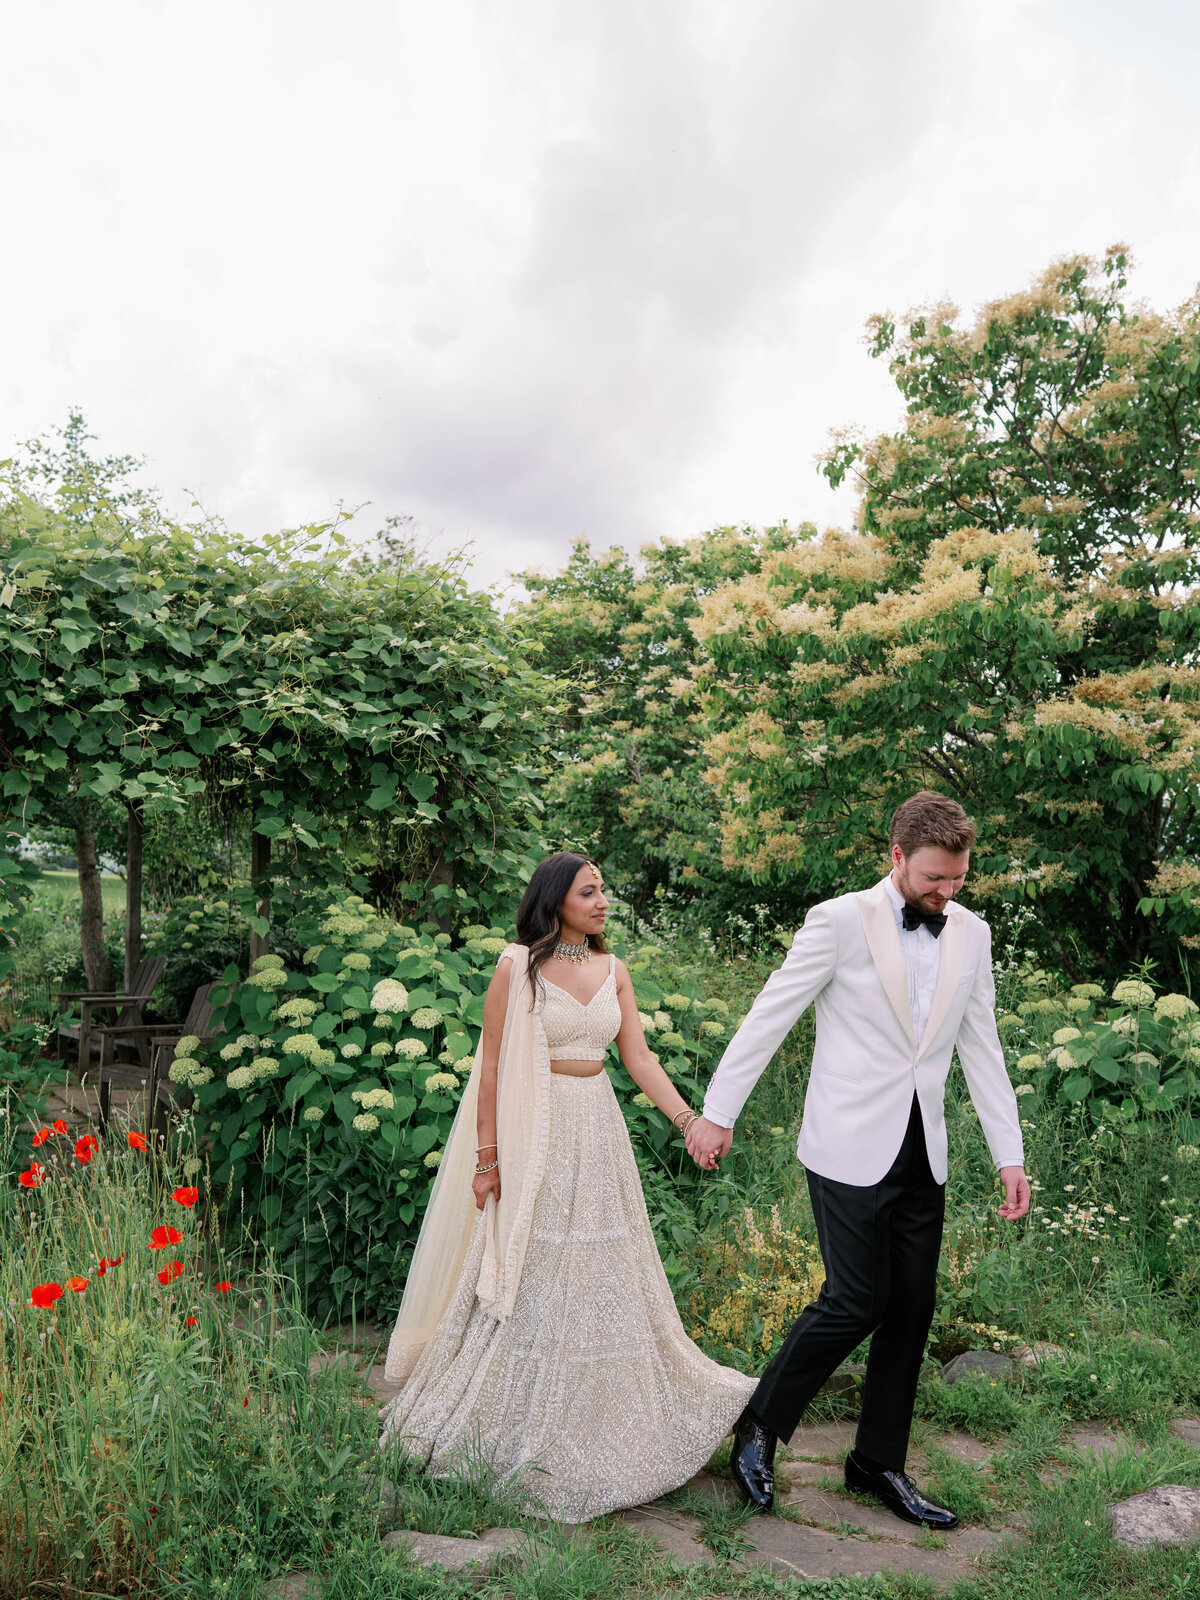 Liz Andolina Photography Destination Wedding Photographer in Italy, New York, Across the East Coast Editorial, heritage-quality images for stylish couples-734